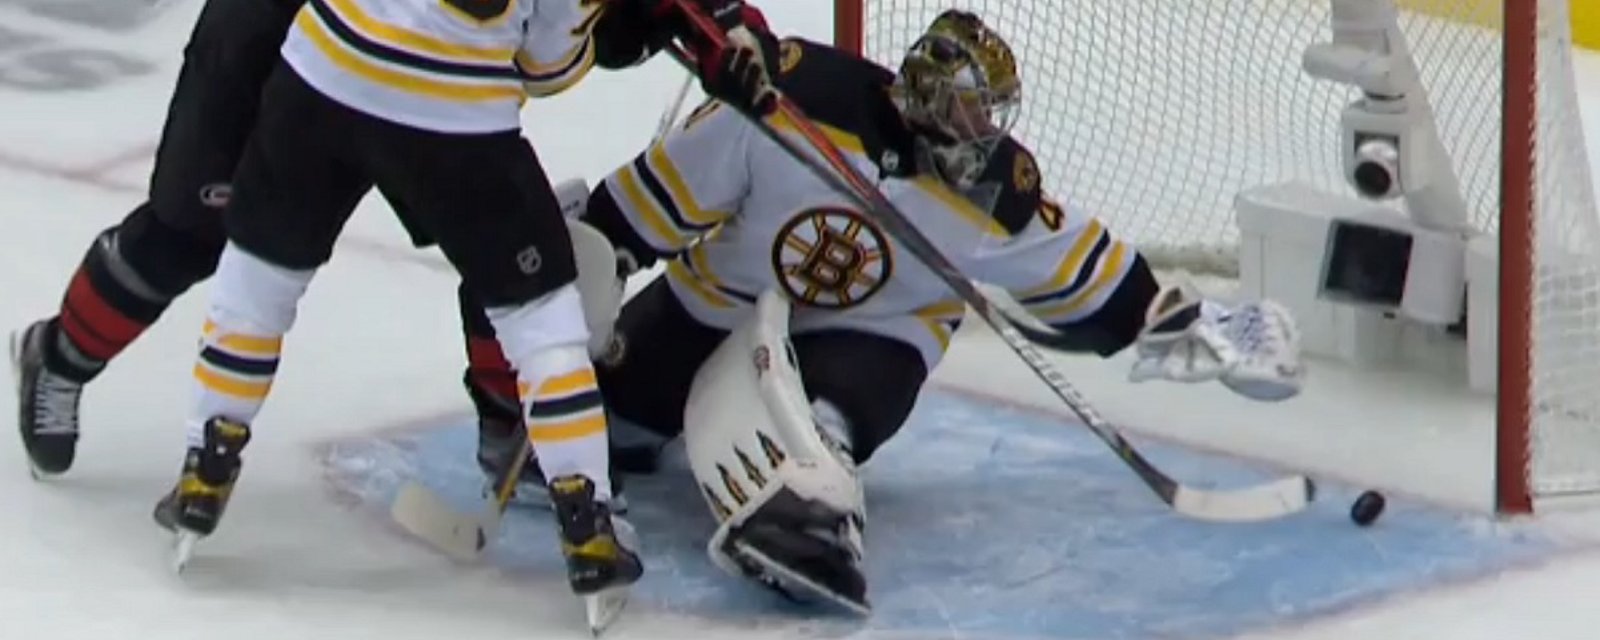 Controversial goal call in Game 3 between the Bruins and Canes.